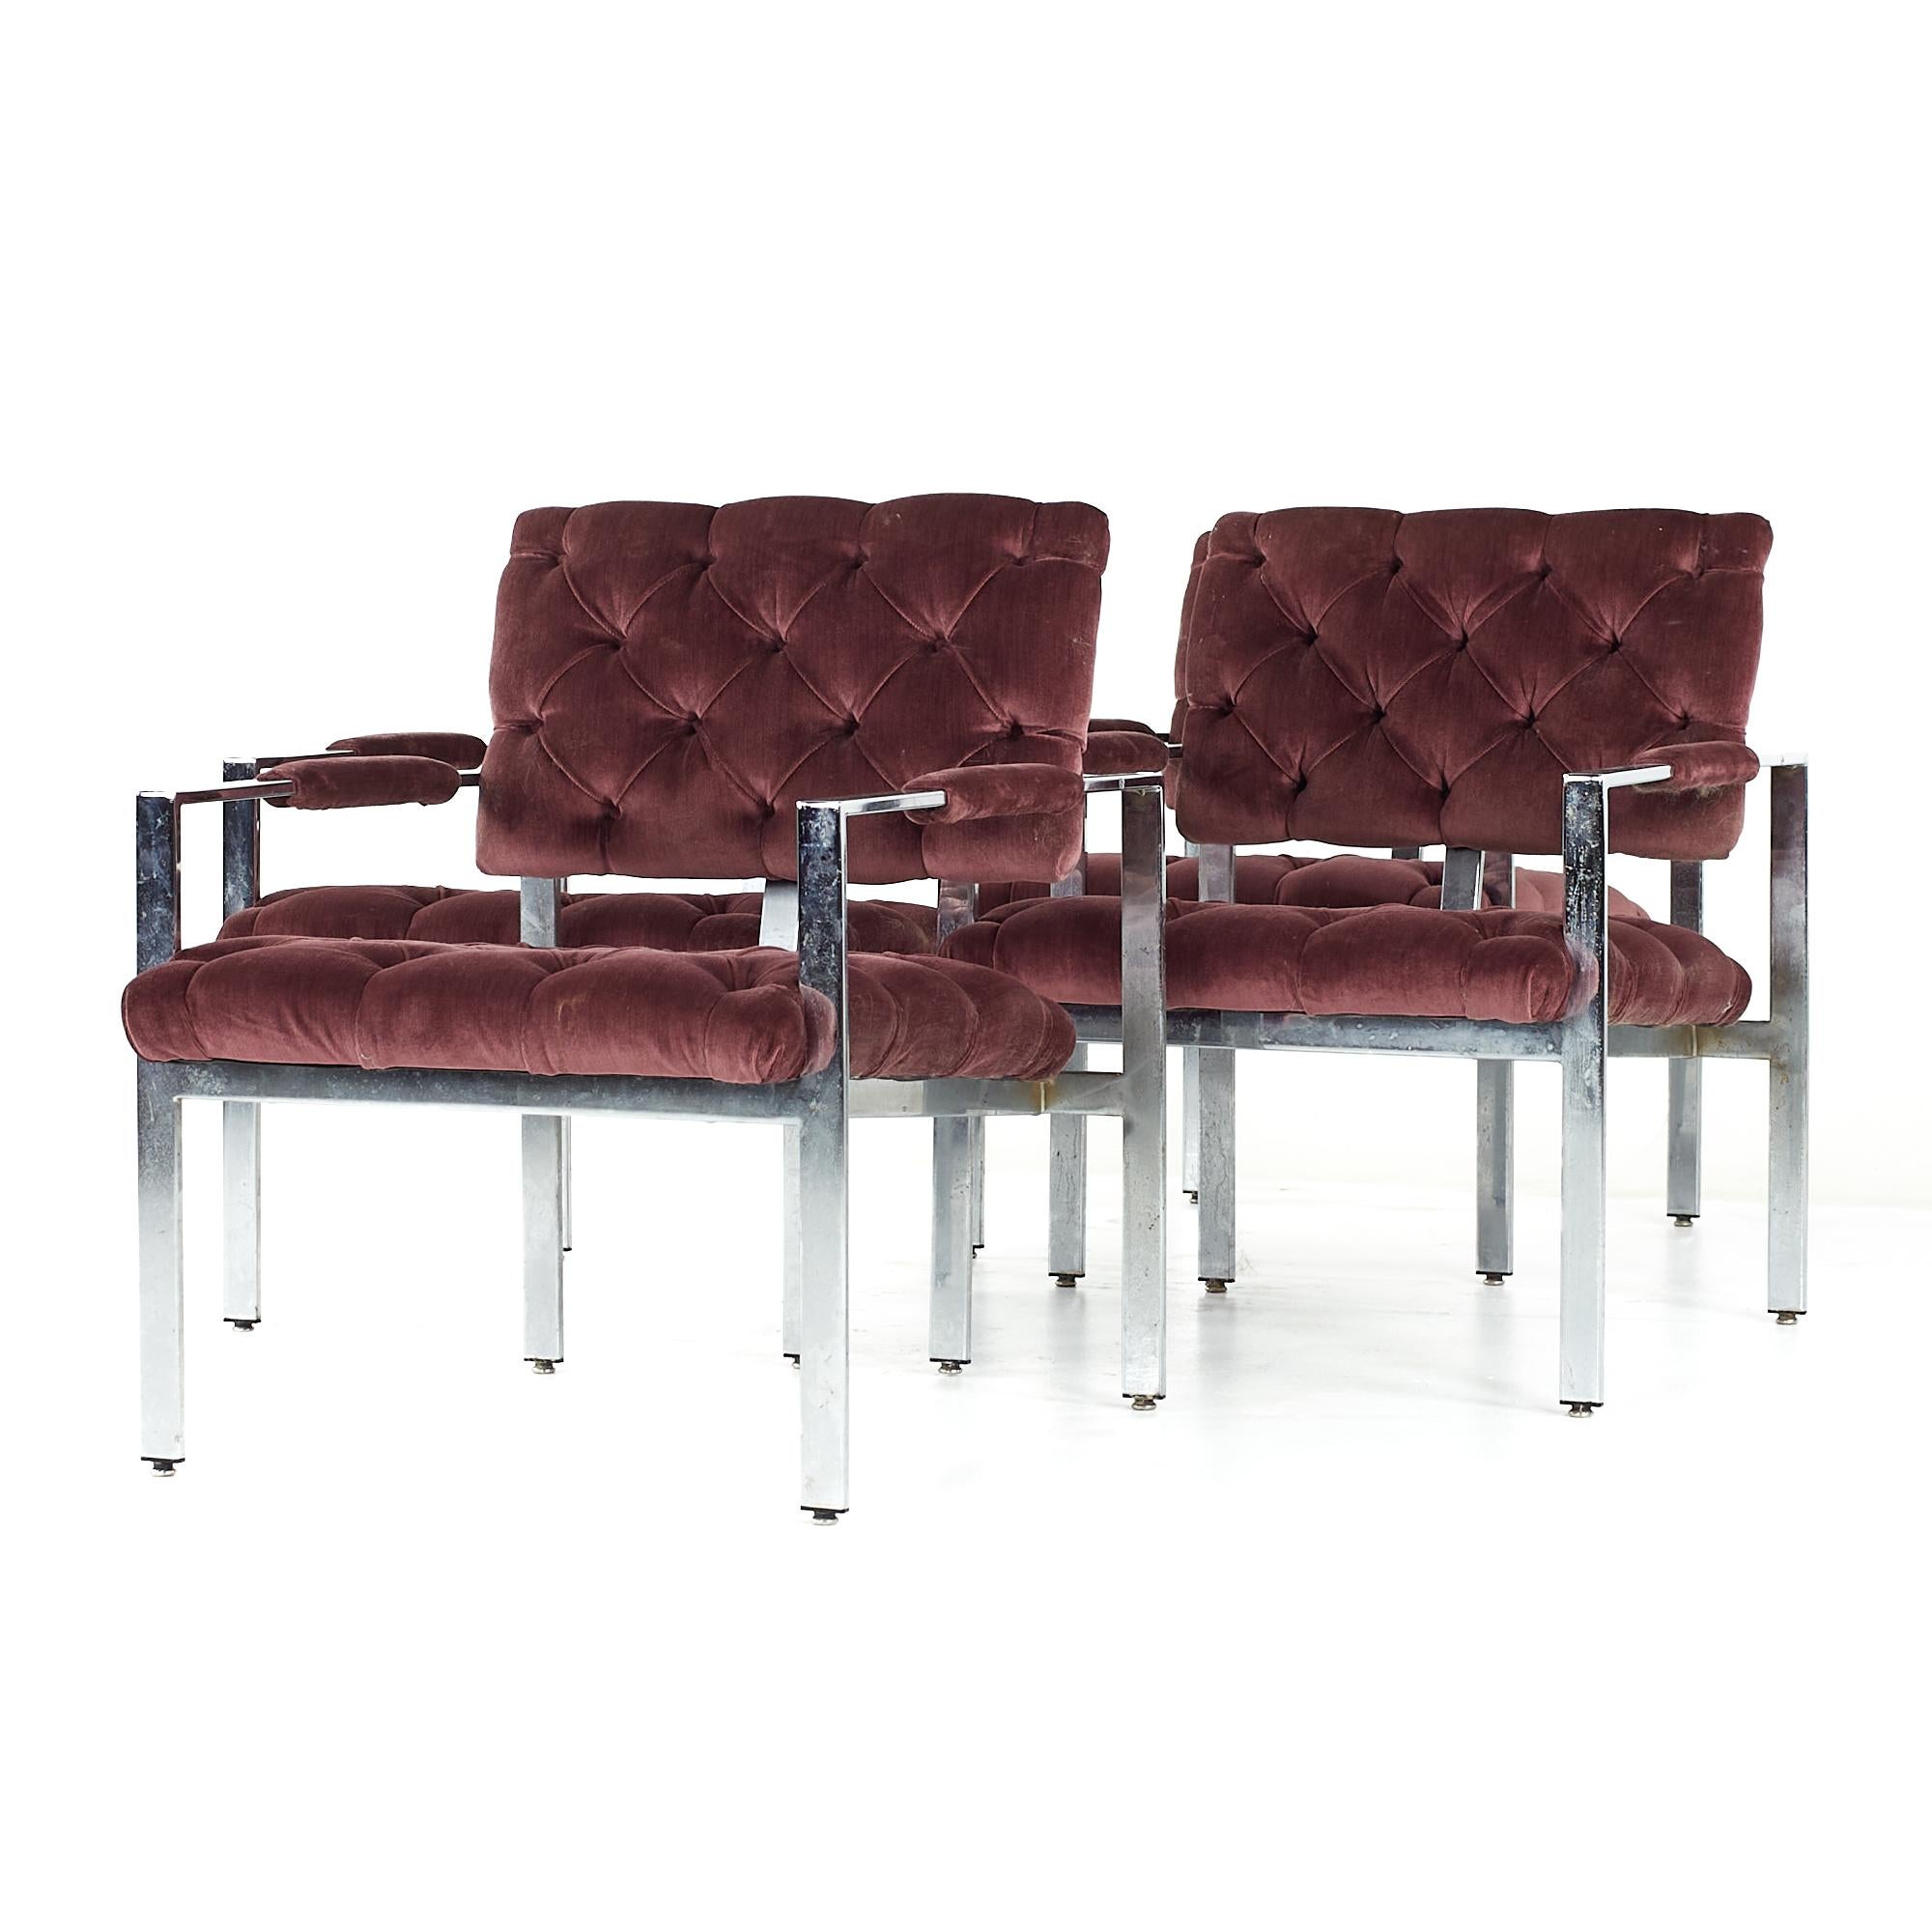 Milo Baughman for Thayer Coggin Midcentury Chrome Tufted Arm Chairs, Set of 6 In Good Condition For Sale In Countryside, IL